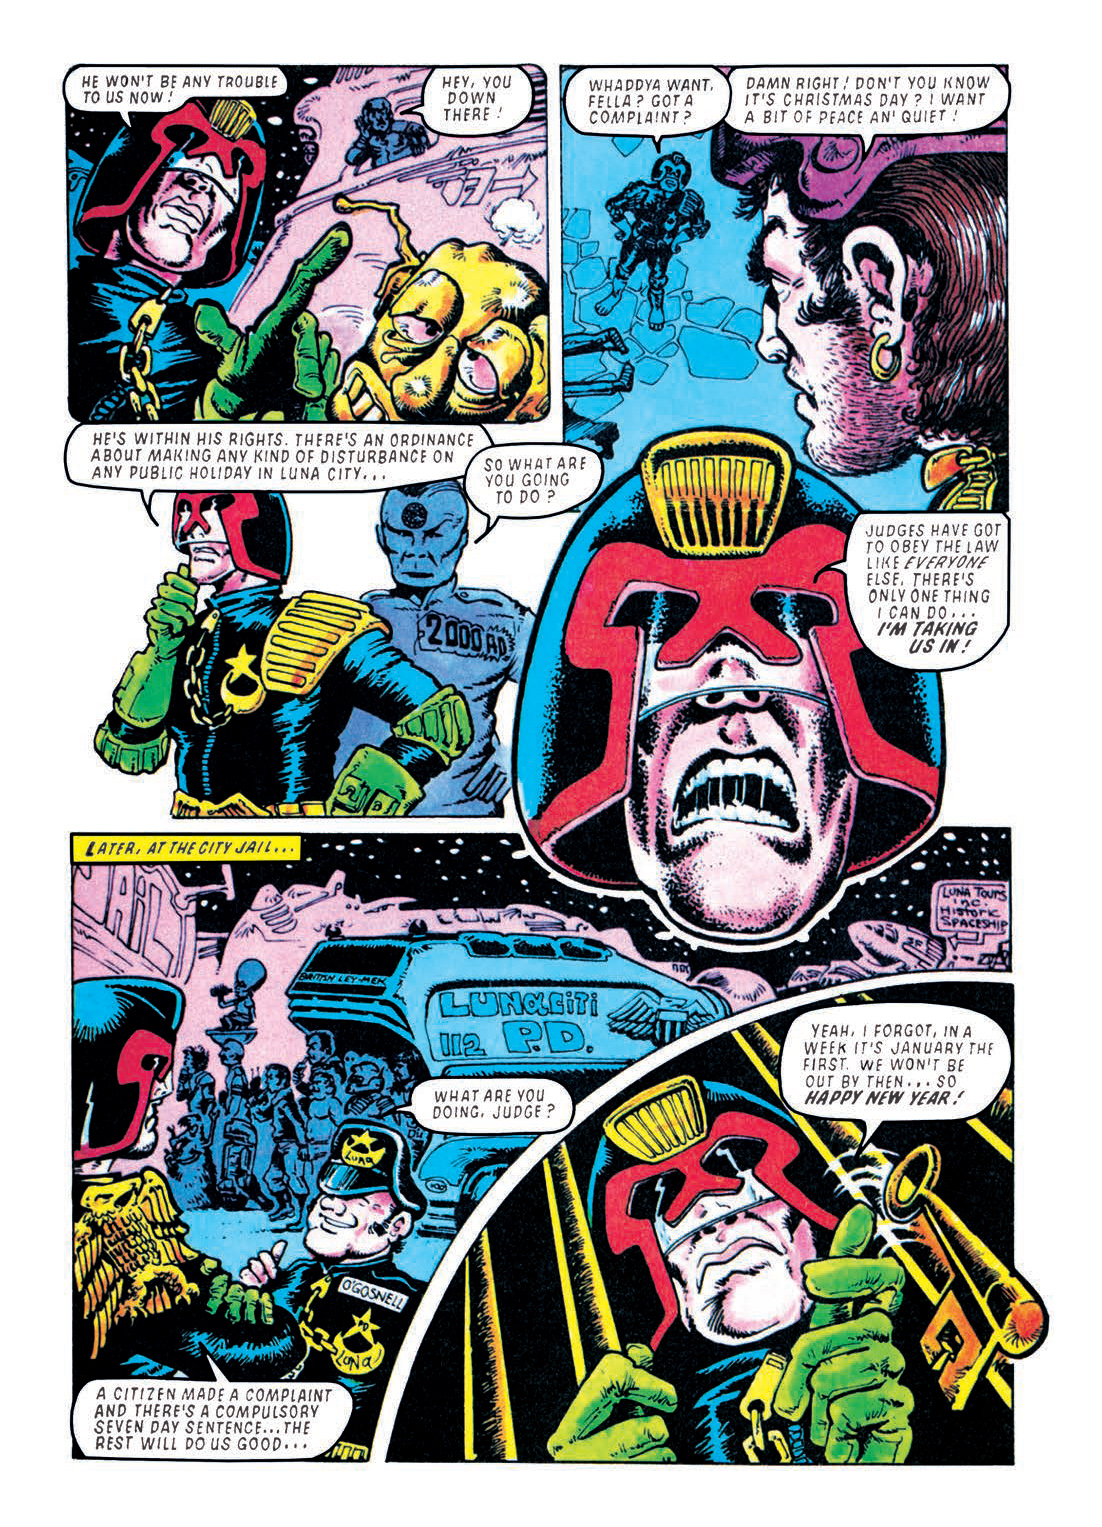 Read online Judge Dredd: The Restricted Files comic -  Issue # TPB 1 - 69